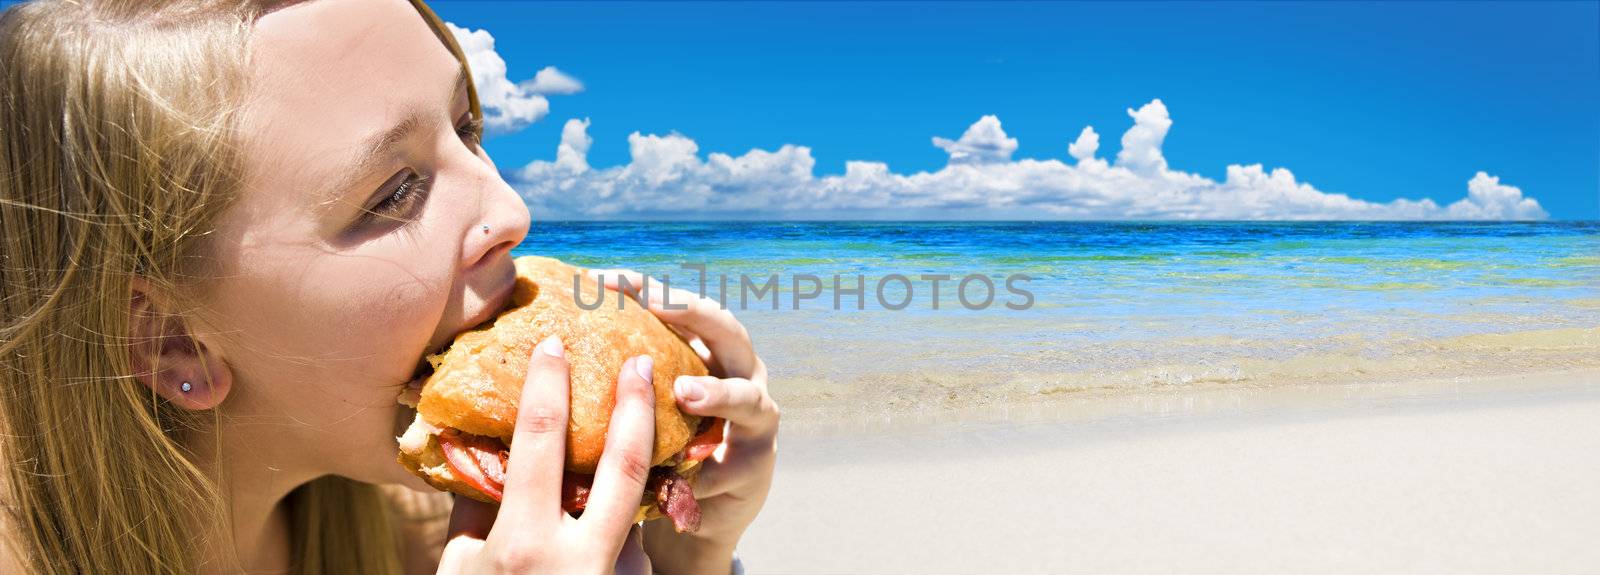 Tropical beach with young woman eating a bacon burger